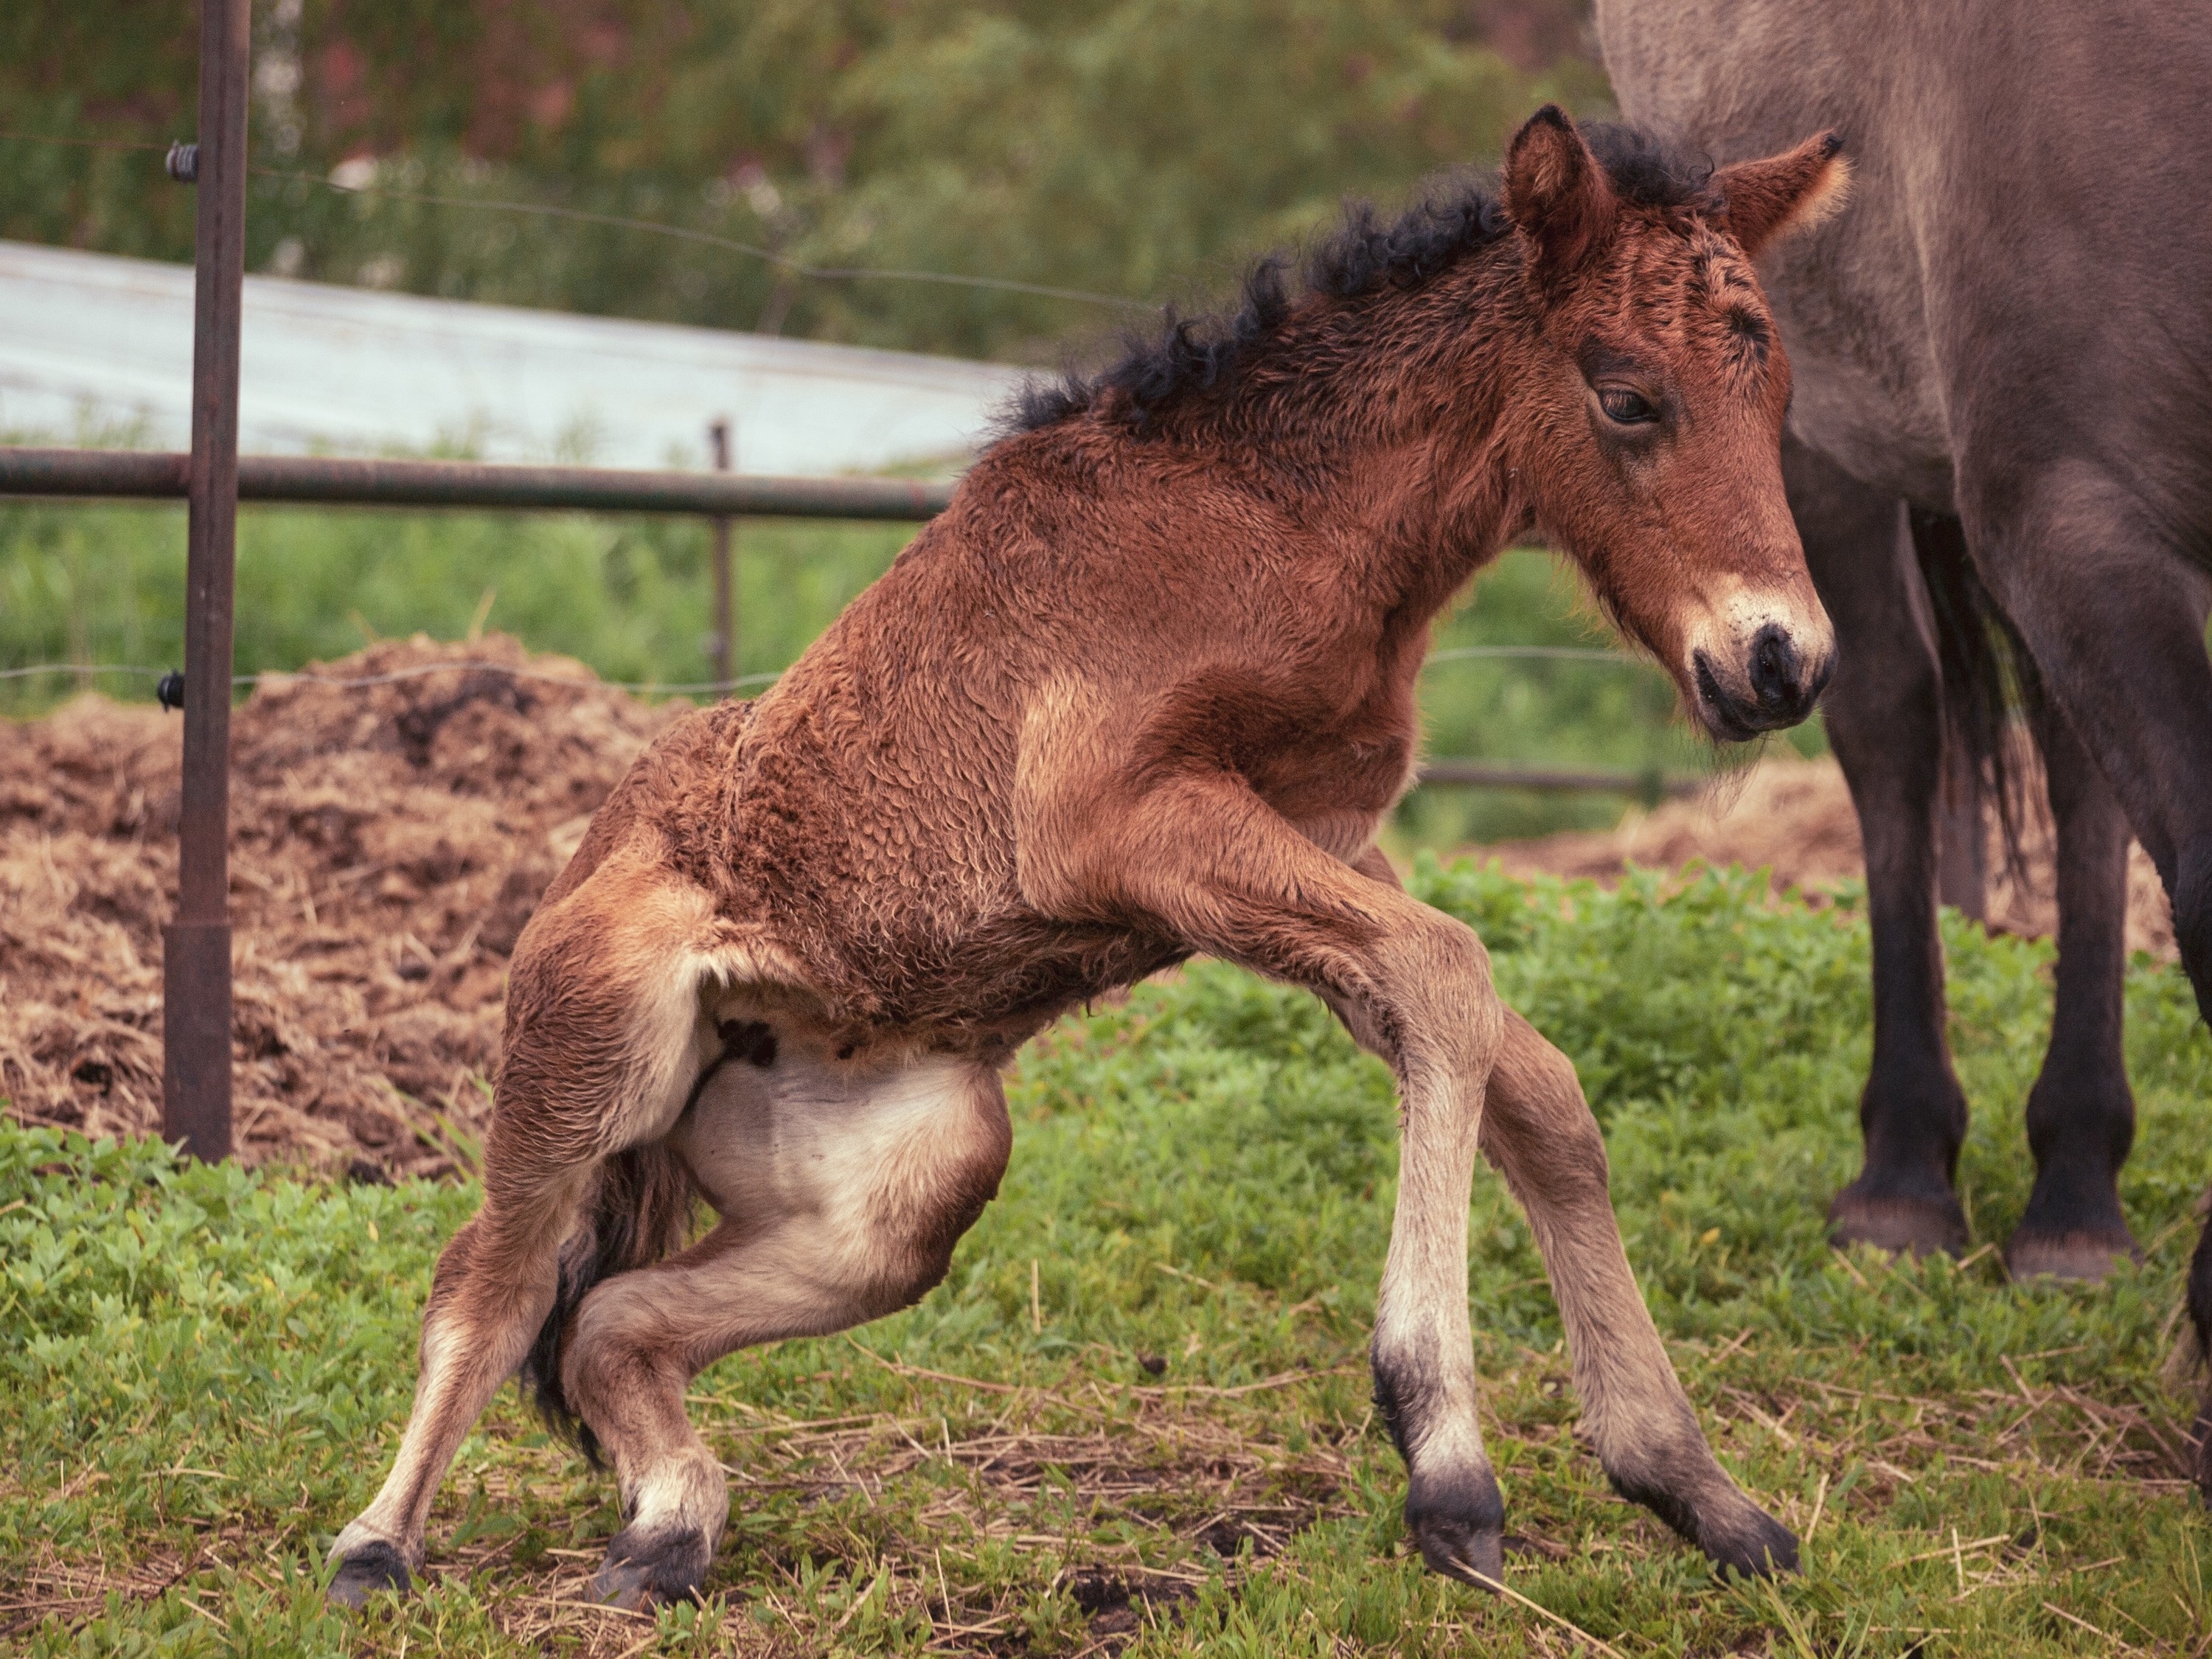 a baby horse trying to stand